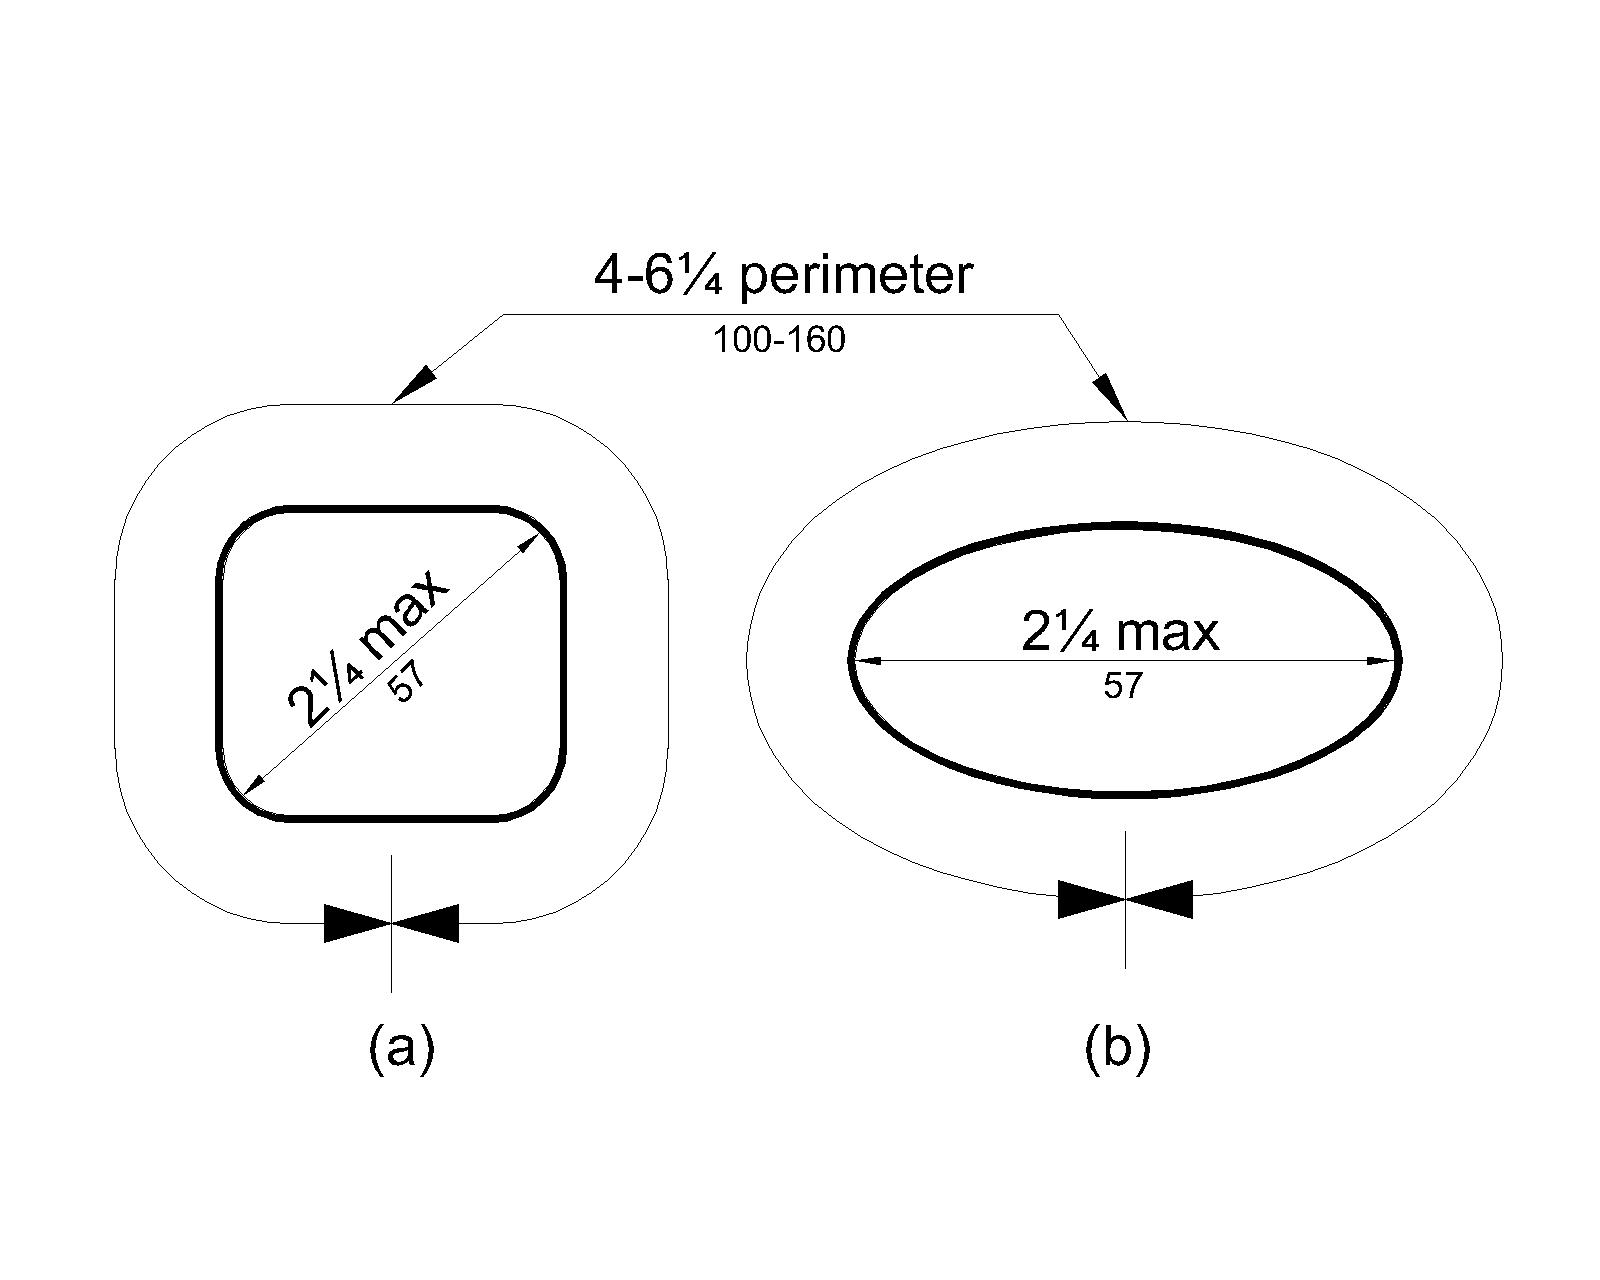 Figure (a) shows a handrail with an approximately square cross section and figure (b) shows an elliptical cross section. The largest cross section dimension is 2¼ inches (57 mm) maximum. The perimeter dimension must be 4 to 6¼ inches (100 to 160 mm).